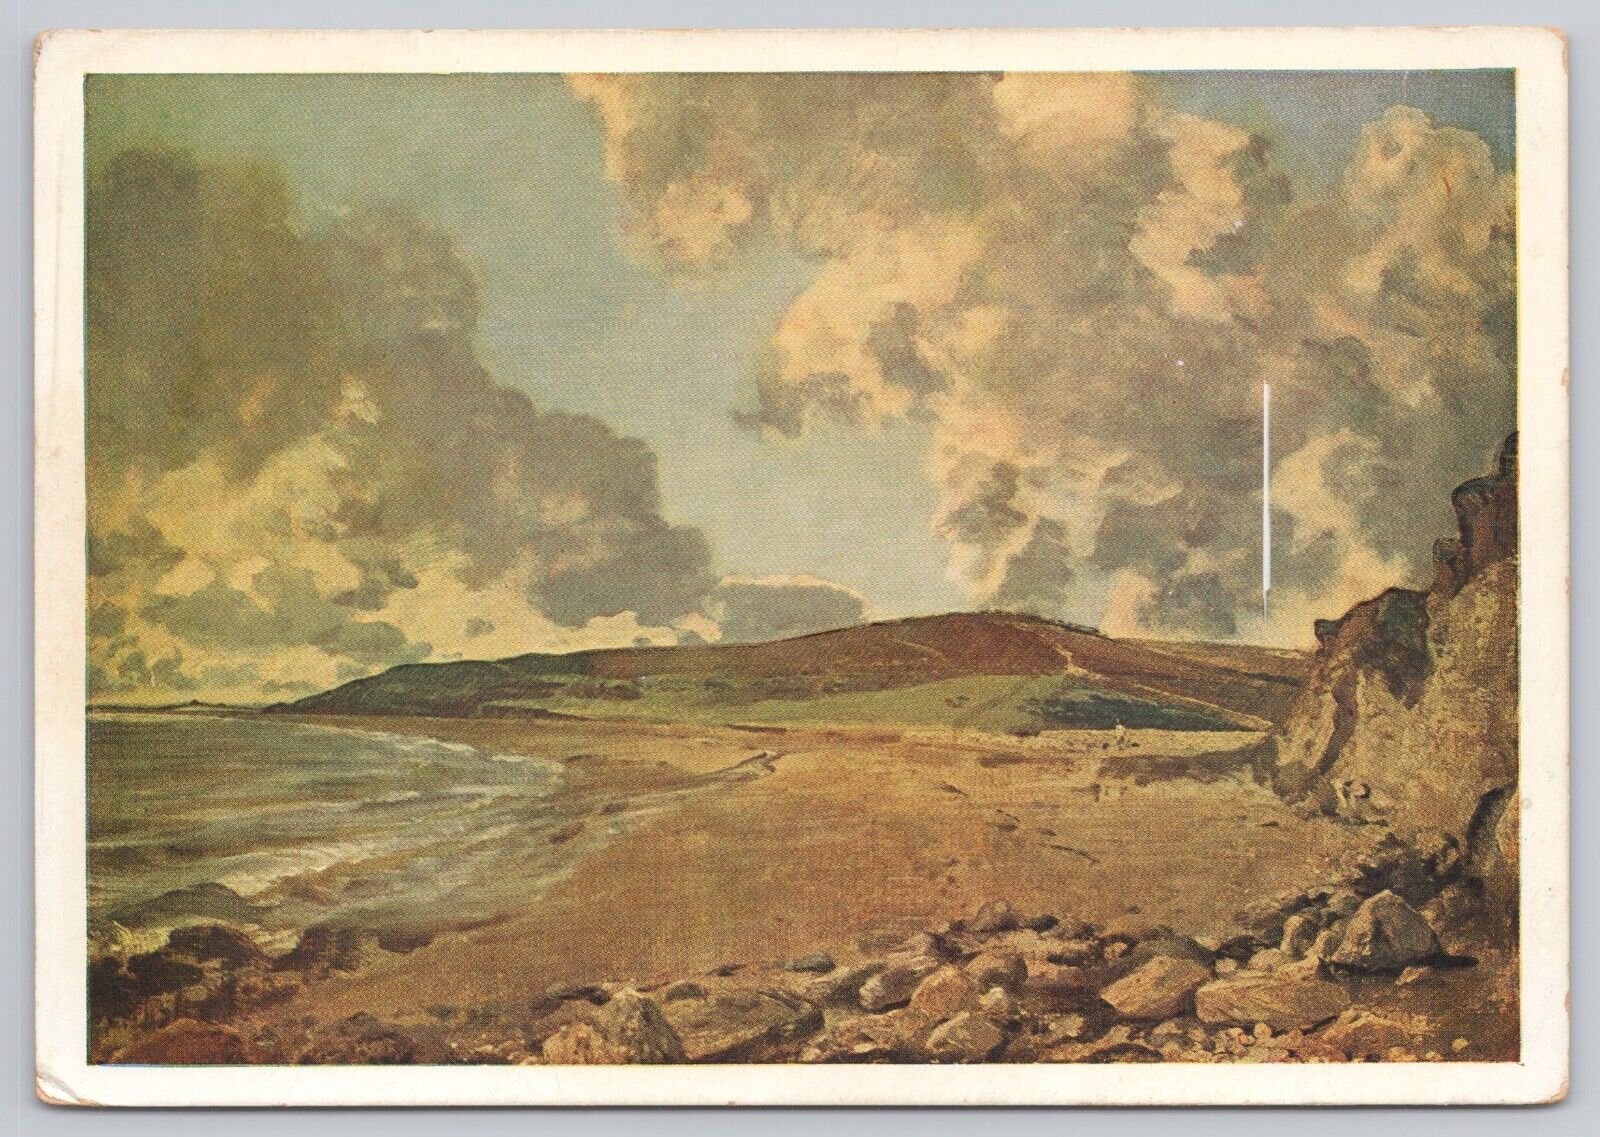 London England, Weymouth Bay, Constable, National Gallery, Vintage Postcard